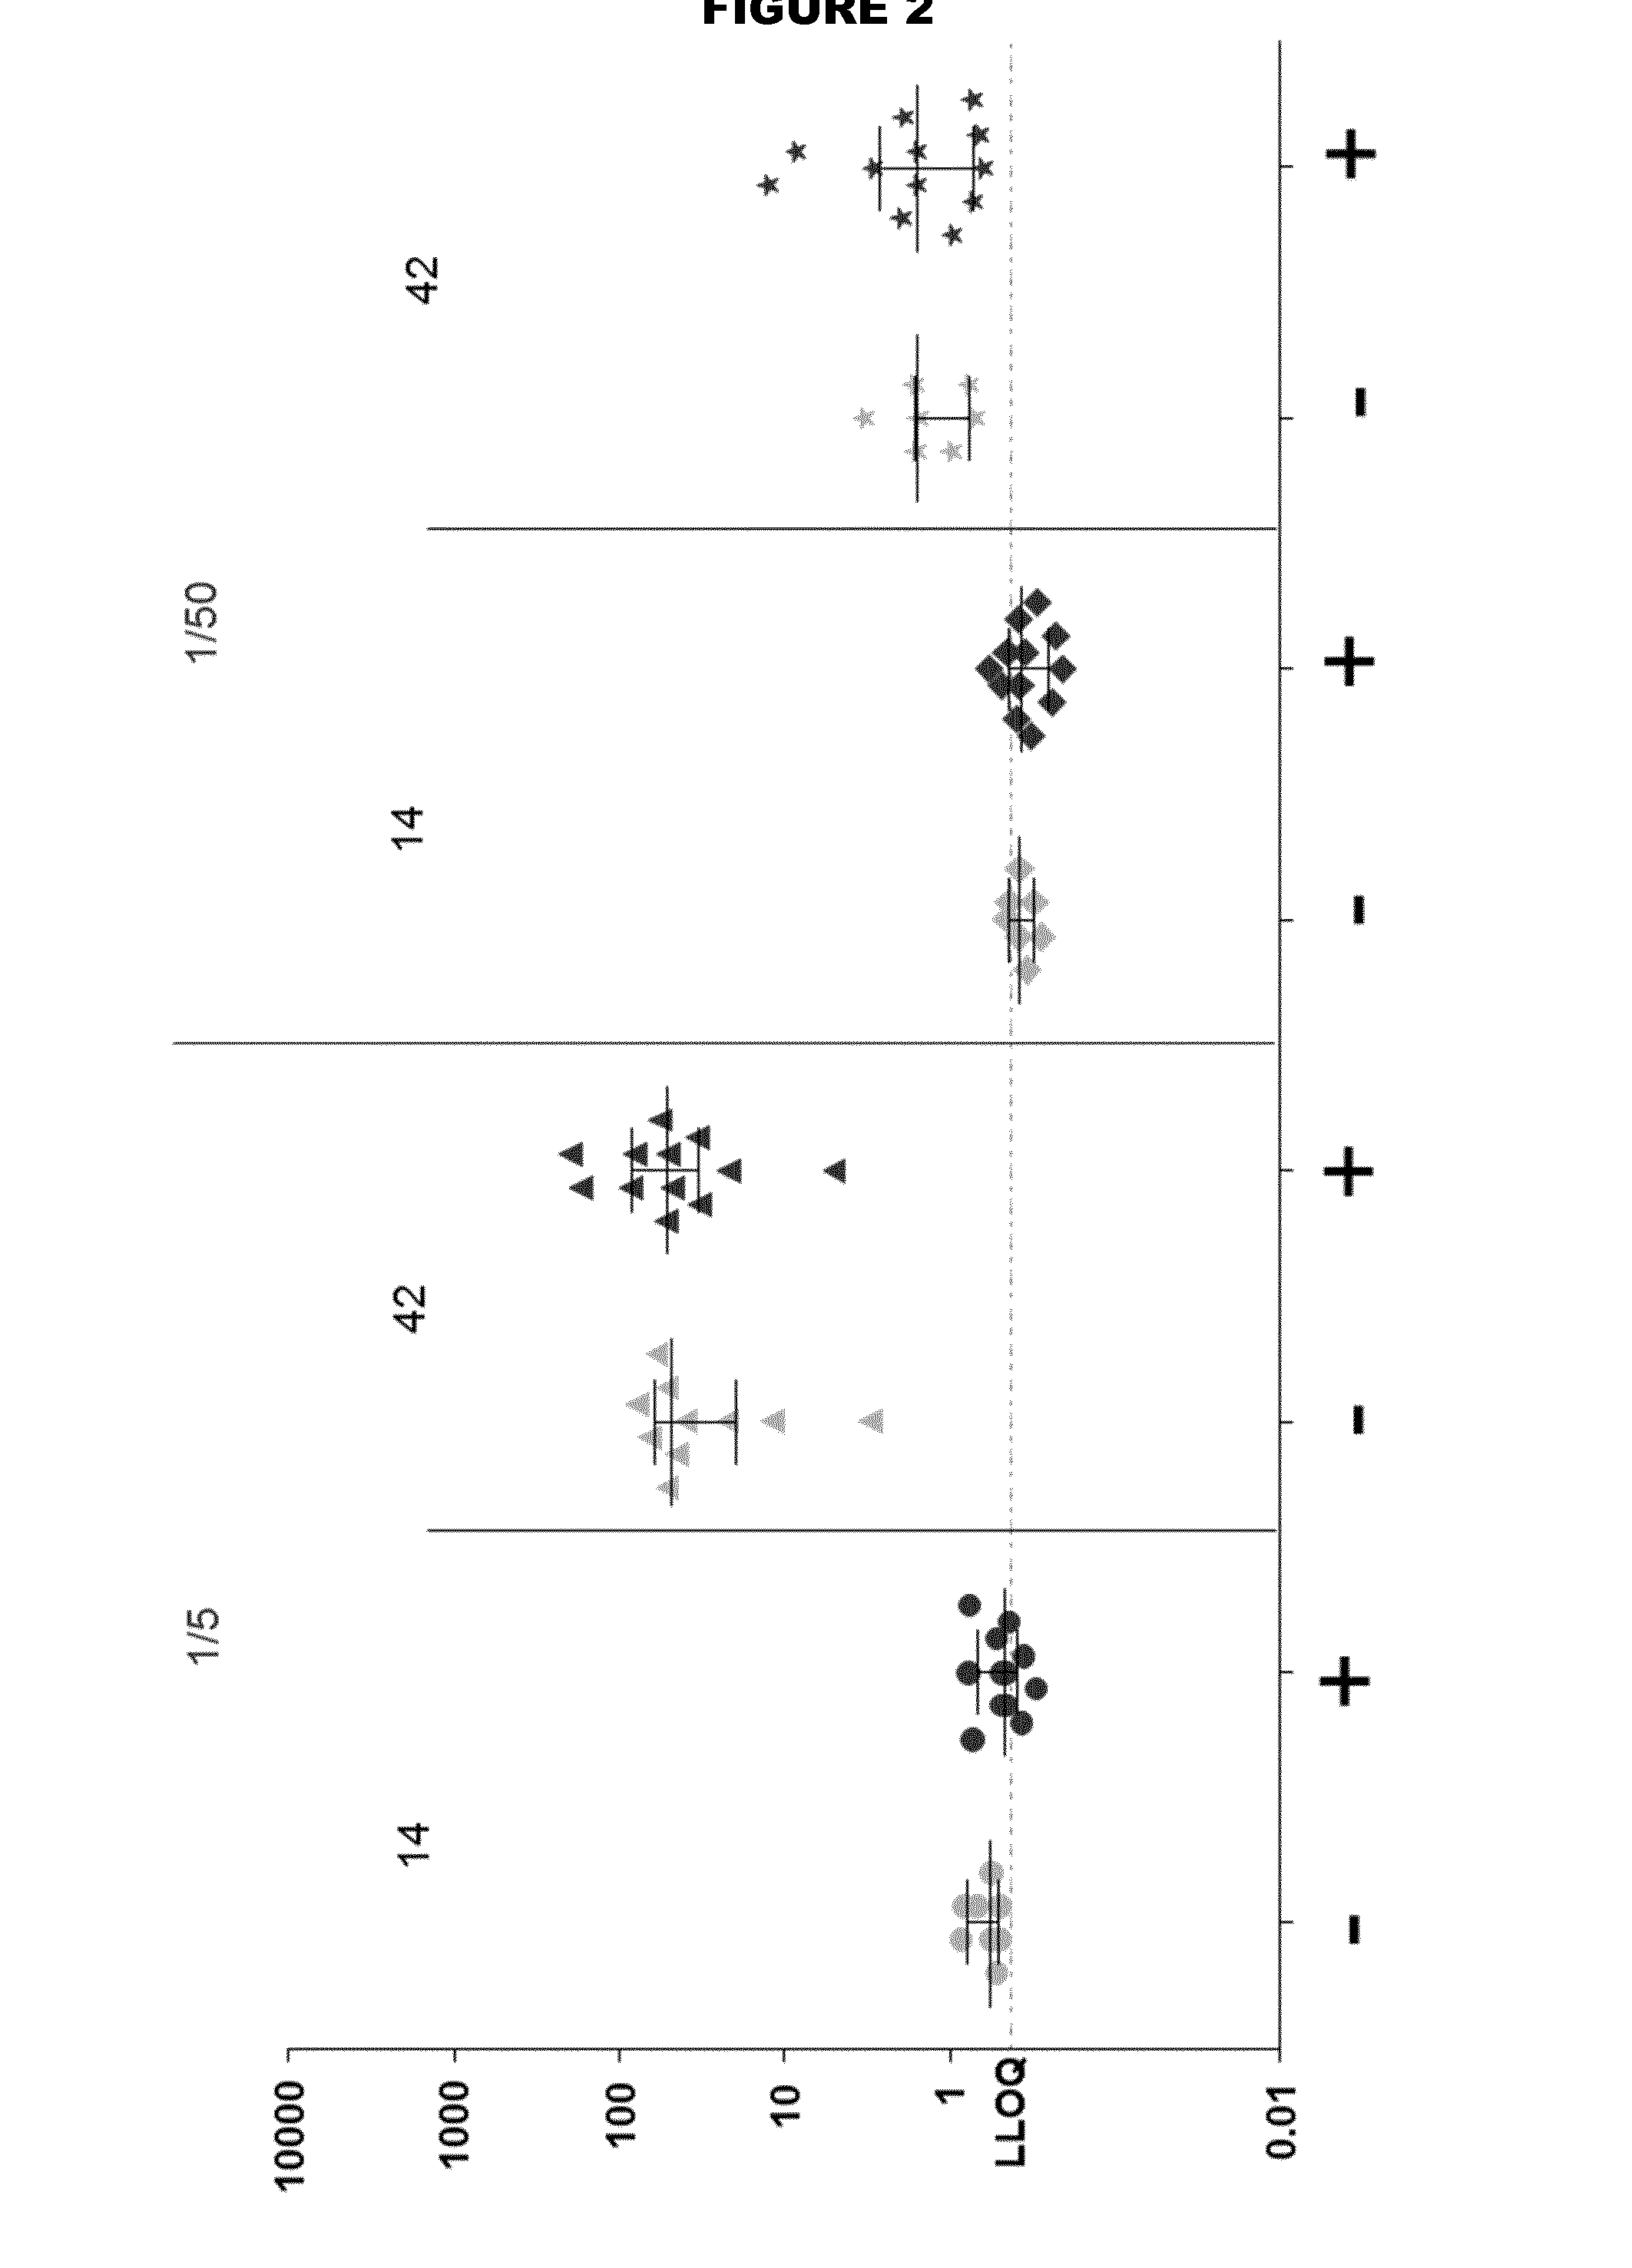 Non-cross-linked acellular pertussis antigens for use in combination vaccines